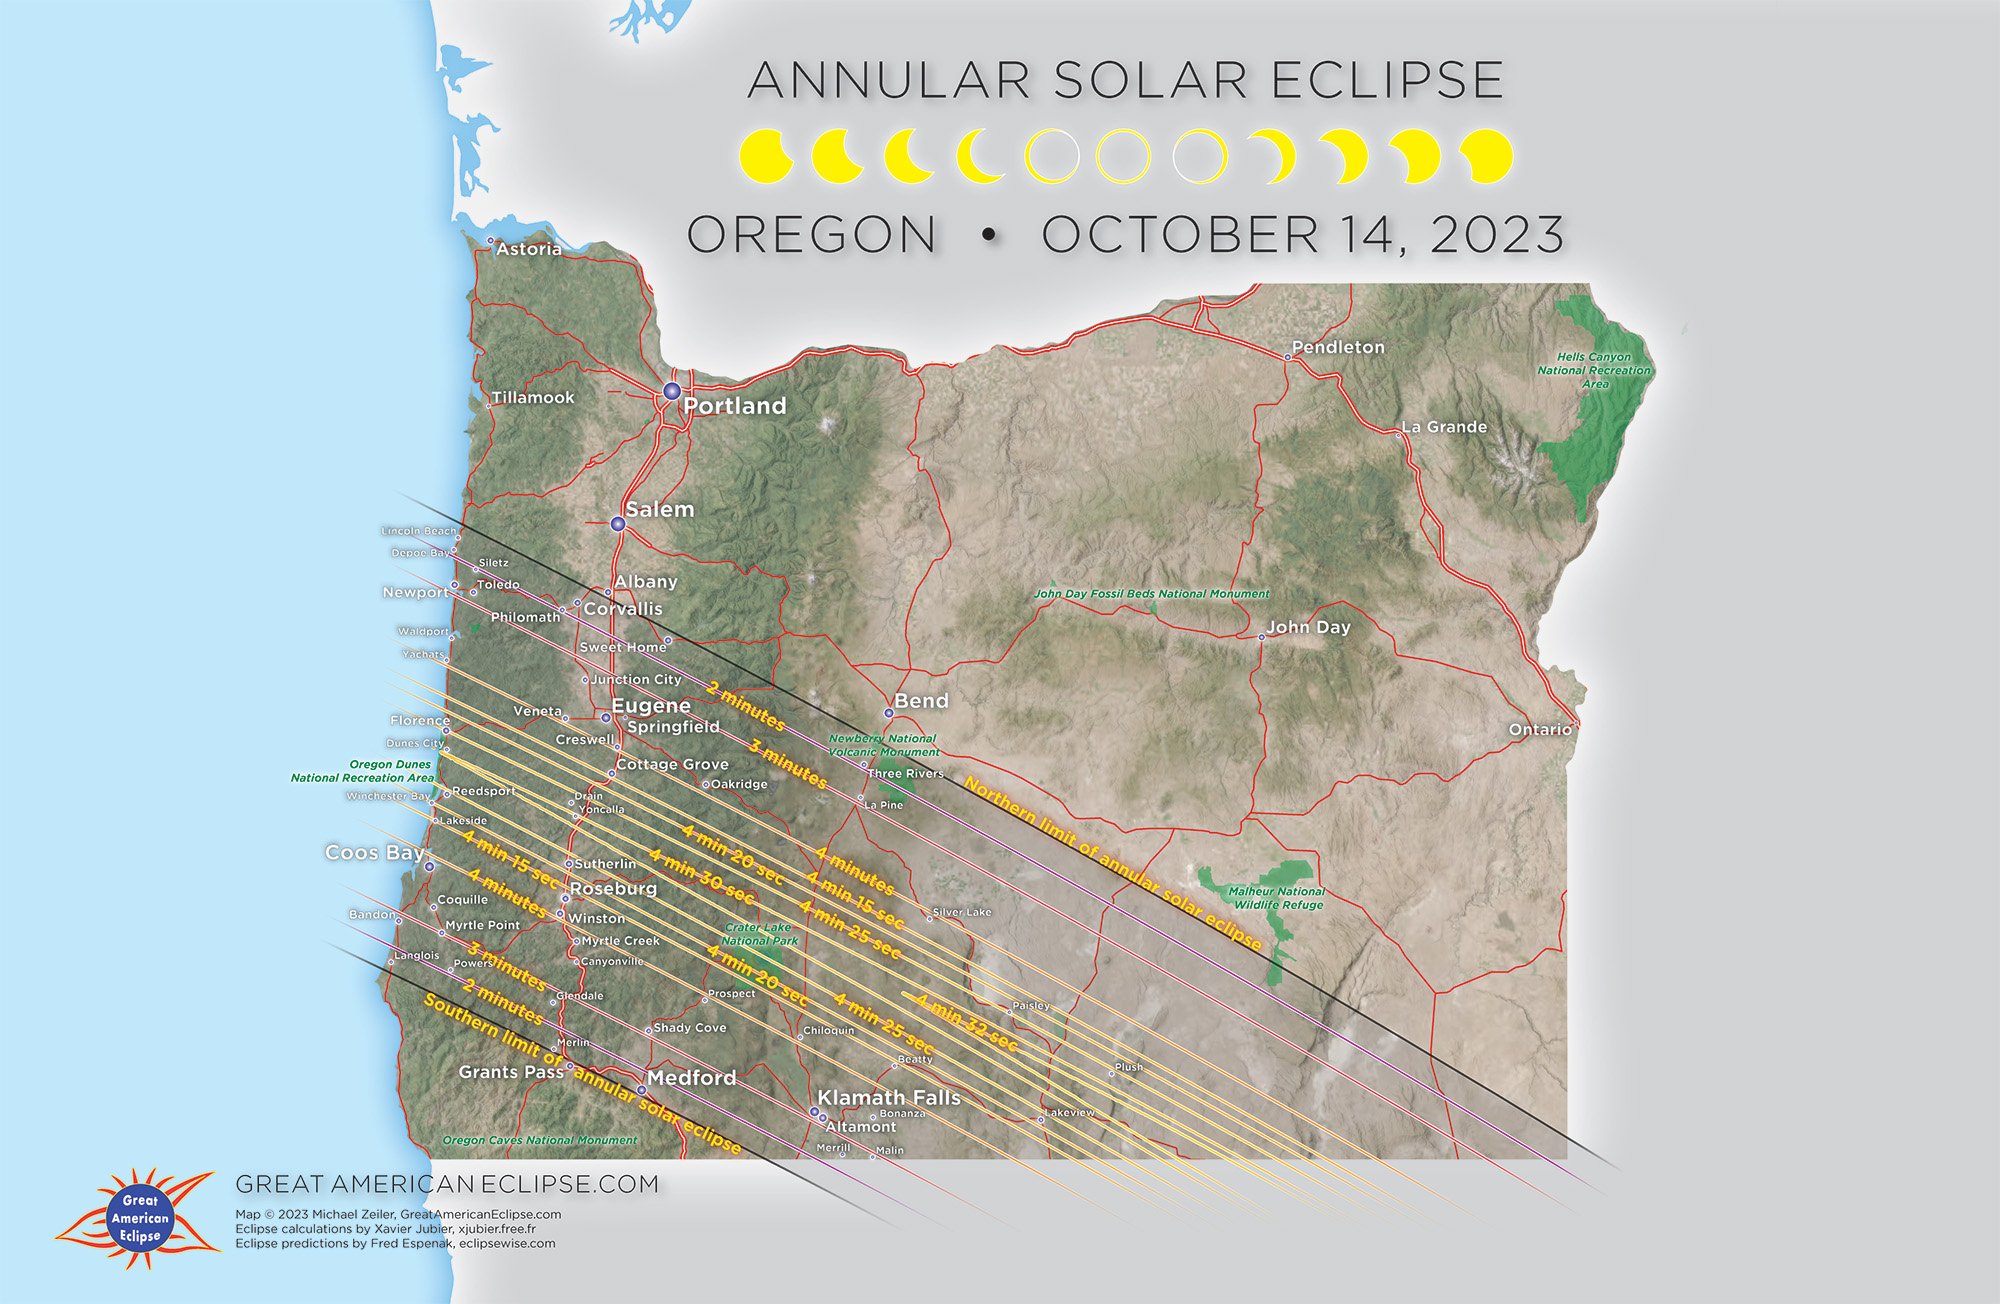 Pray for clear skies Saturday, Oct. 14 as central Oregon coast